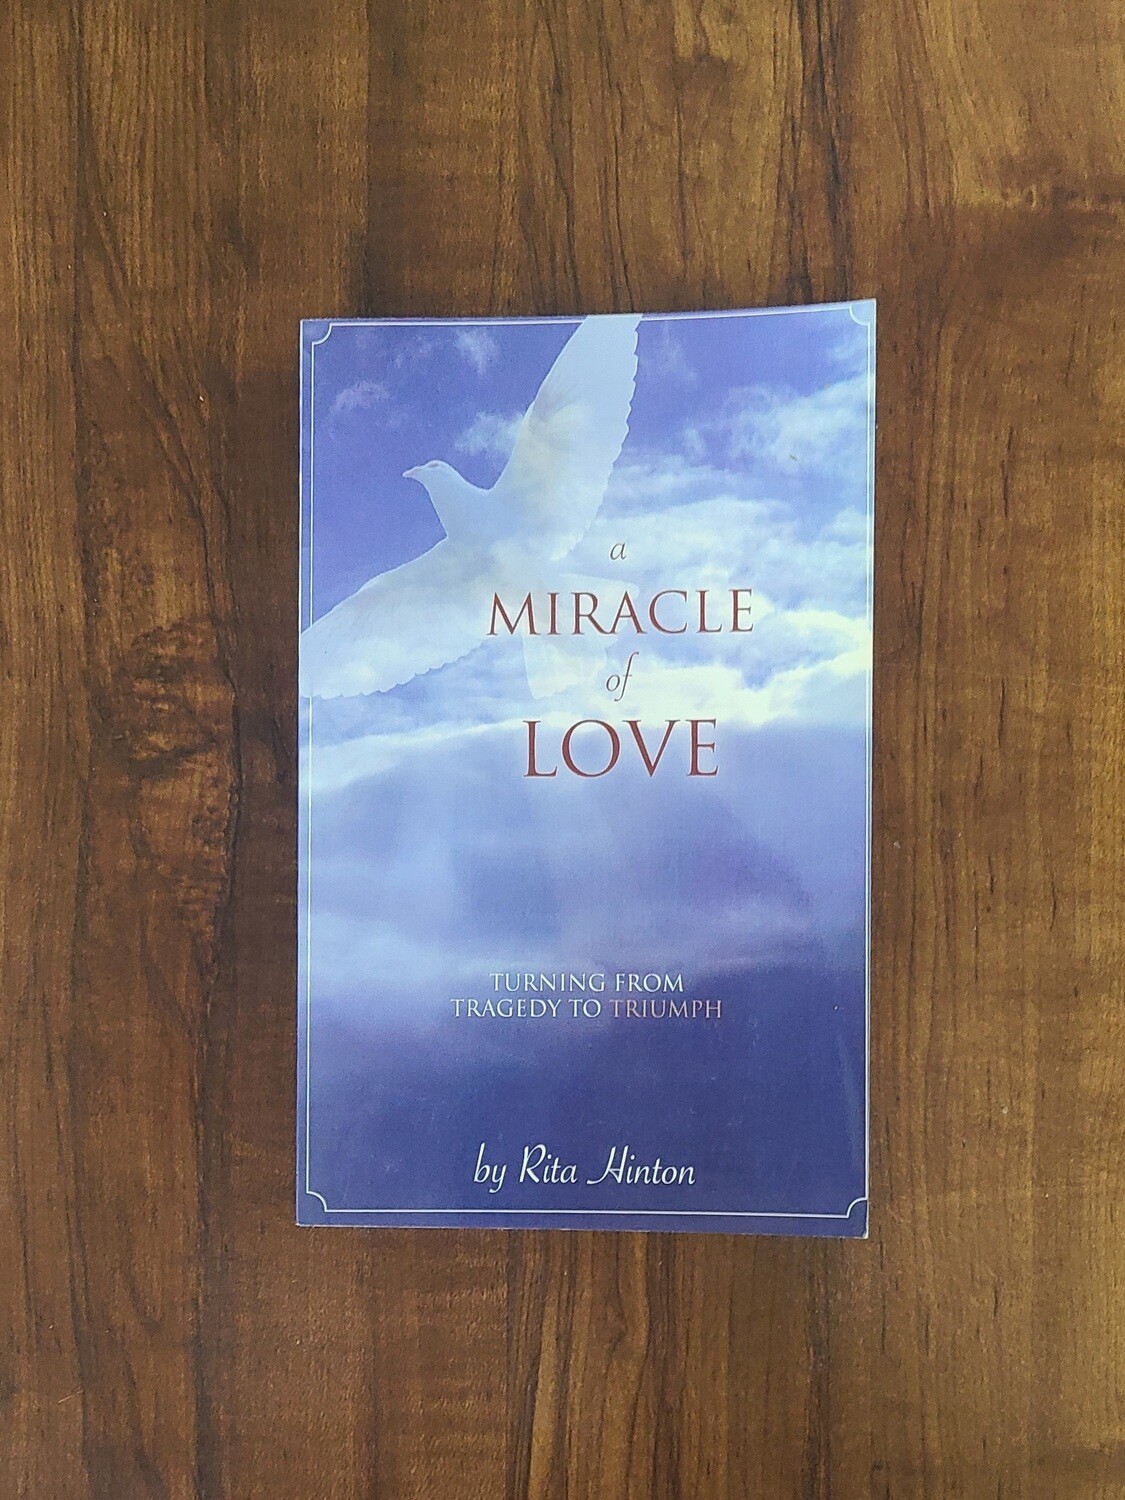 A Miracle of Love by Rita Hinton